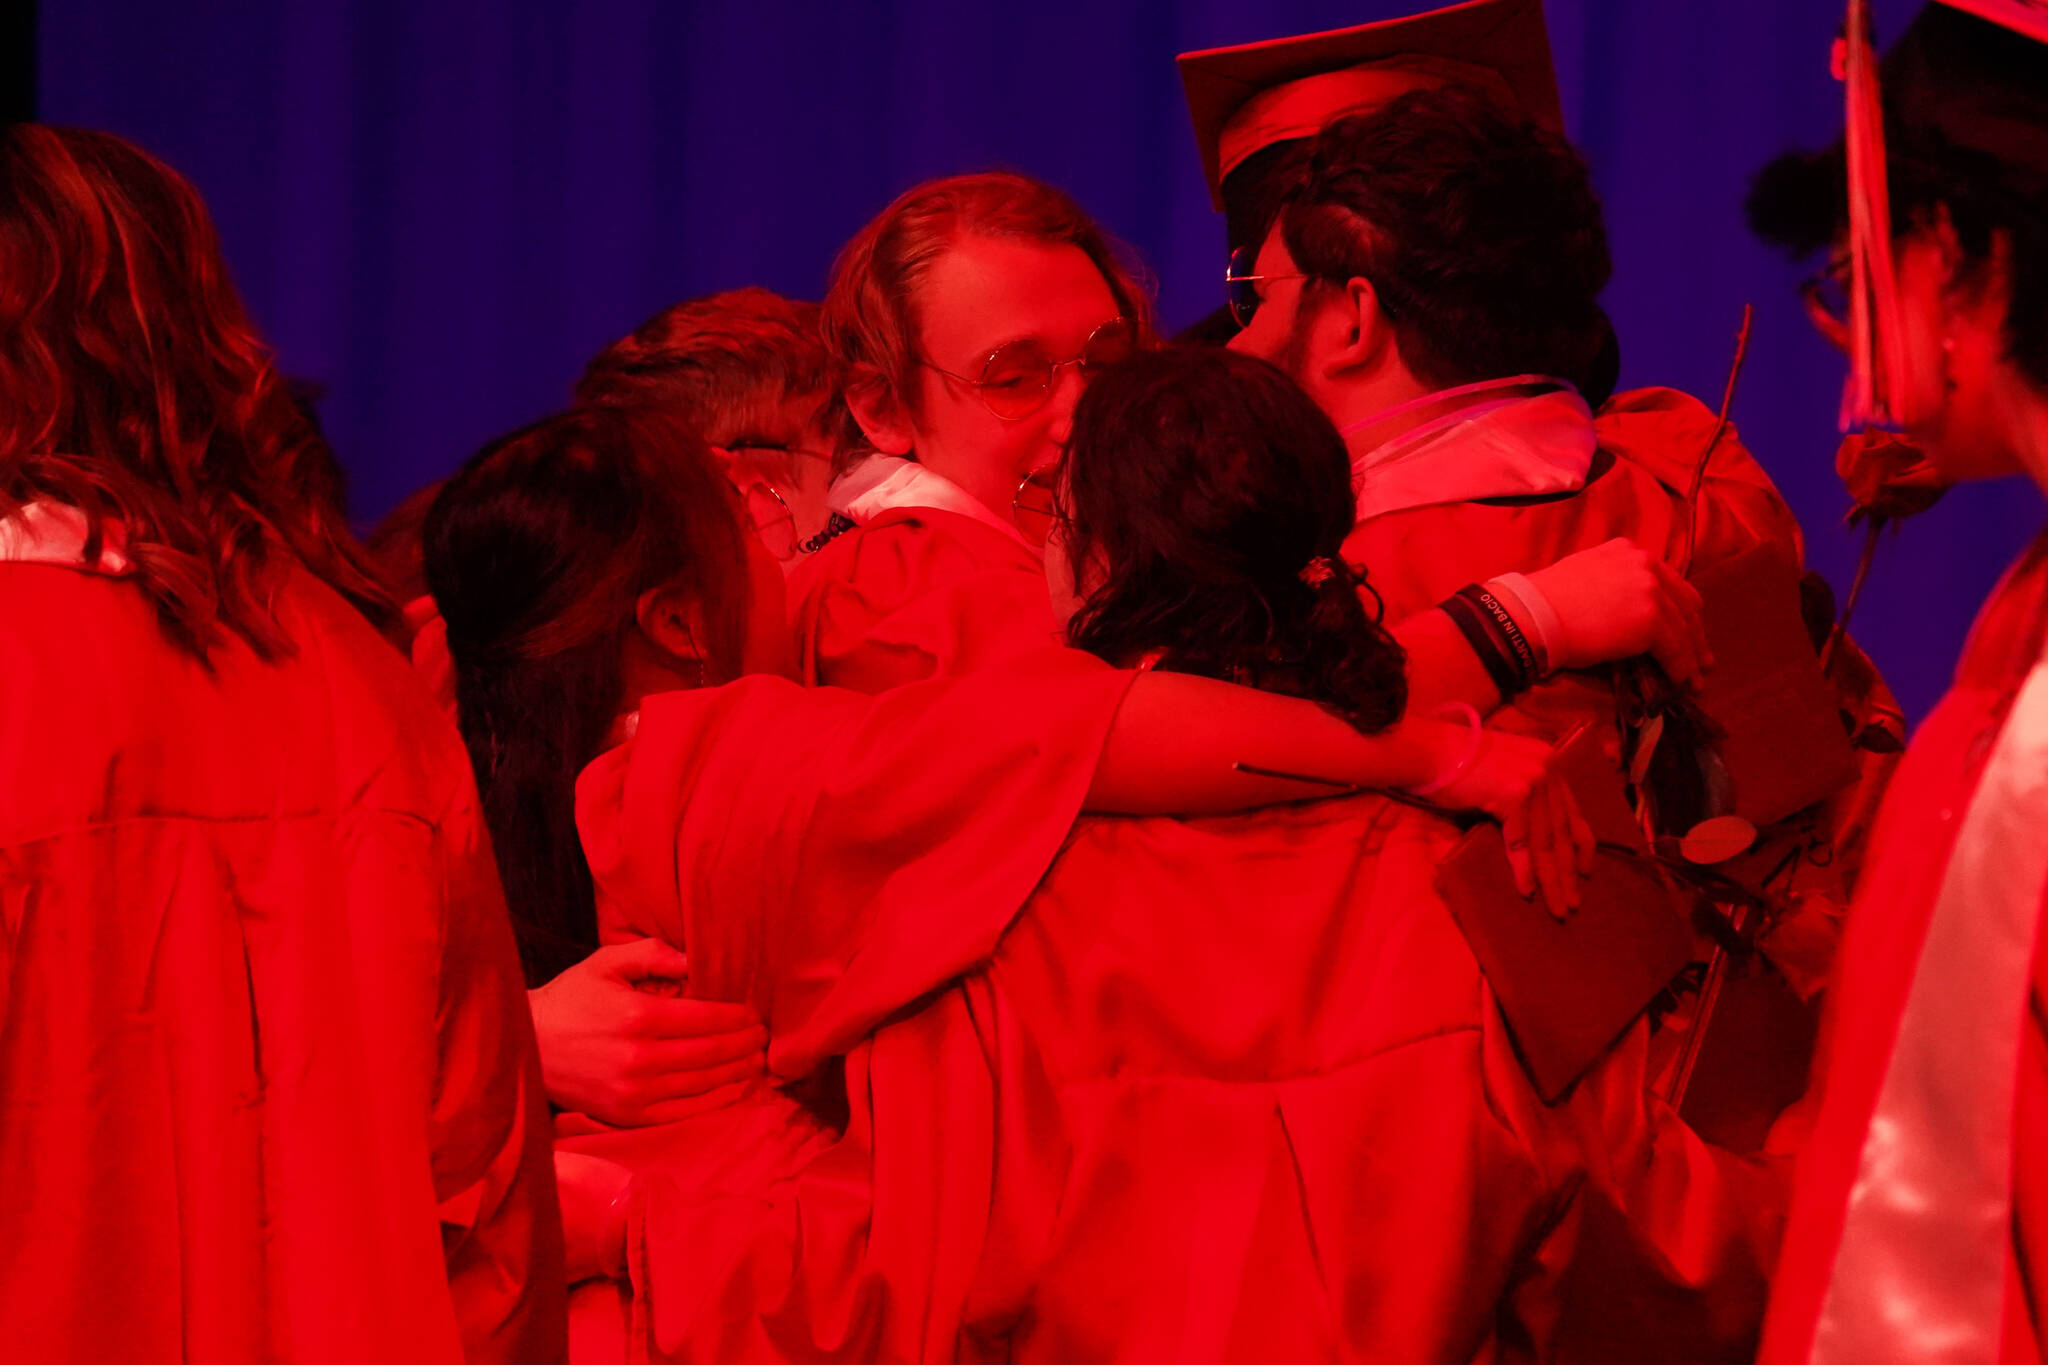 Kenai Central High School graduates celebrate after their graduation ceremony on Wednesday, May 17, 2023, at Kenai Central High School in Kenai, Alaska. (Jake Dye/Peninsula Clarion)